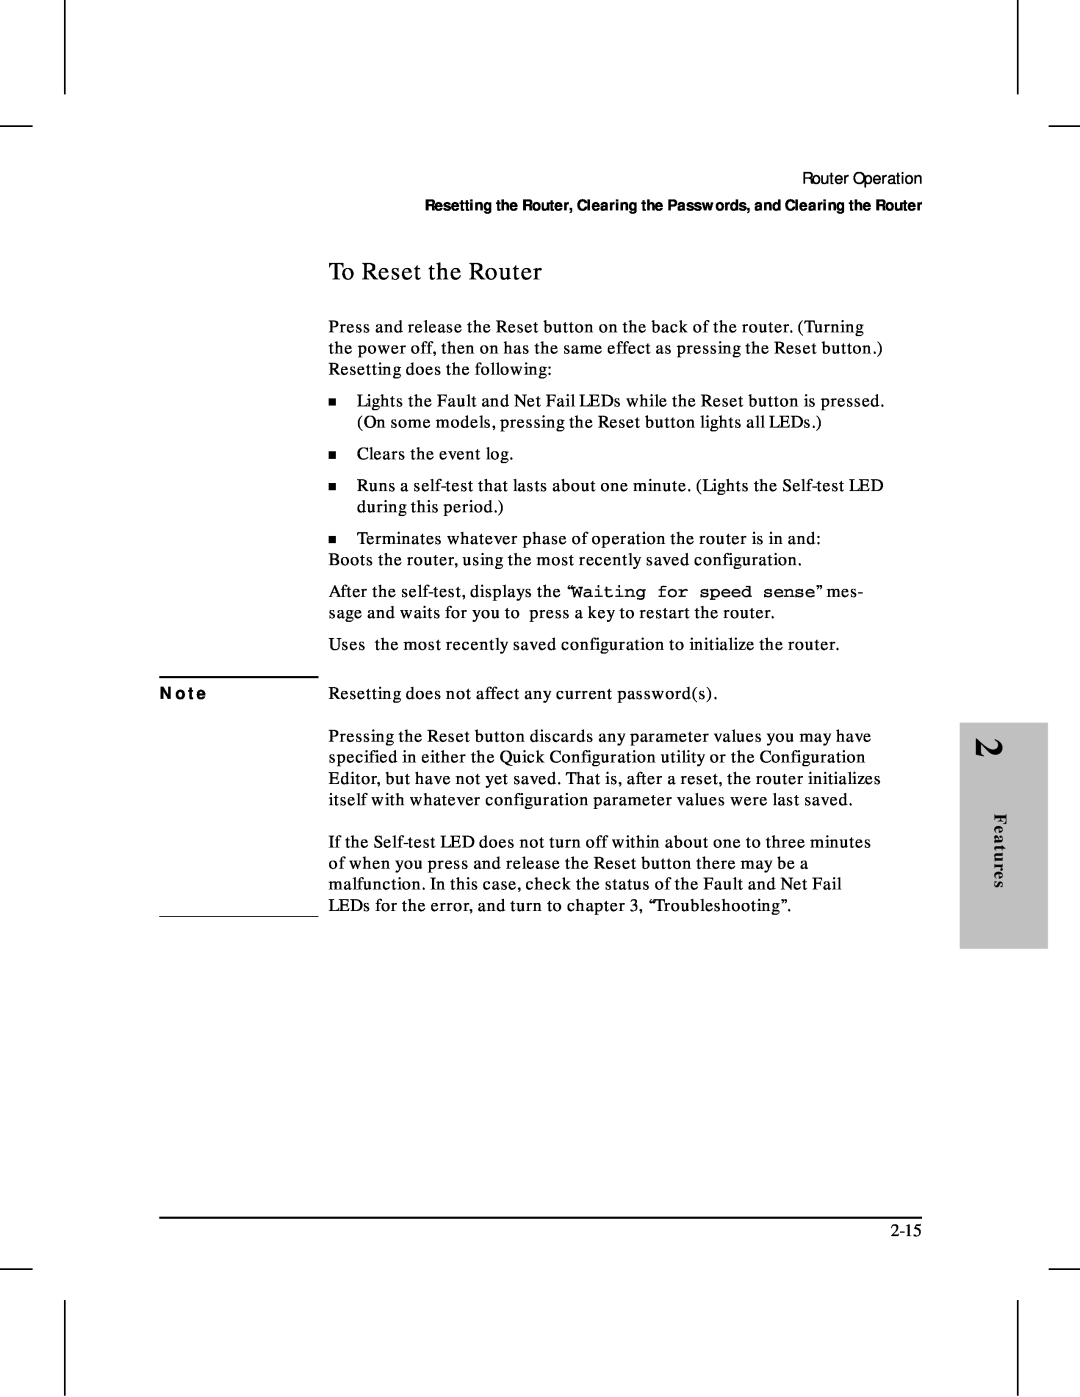 HP 480 manual To Reset the Router, N o t e, Features 